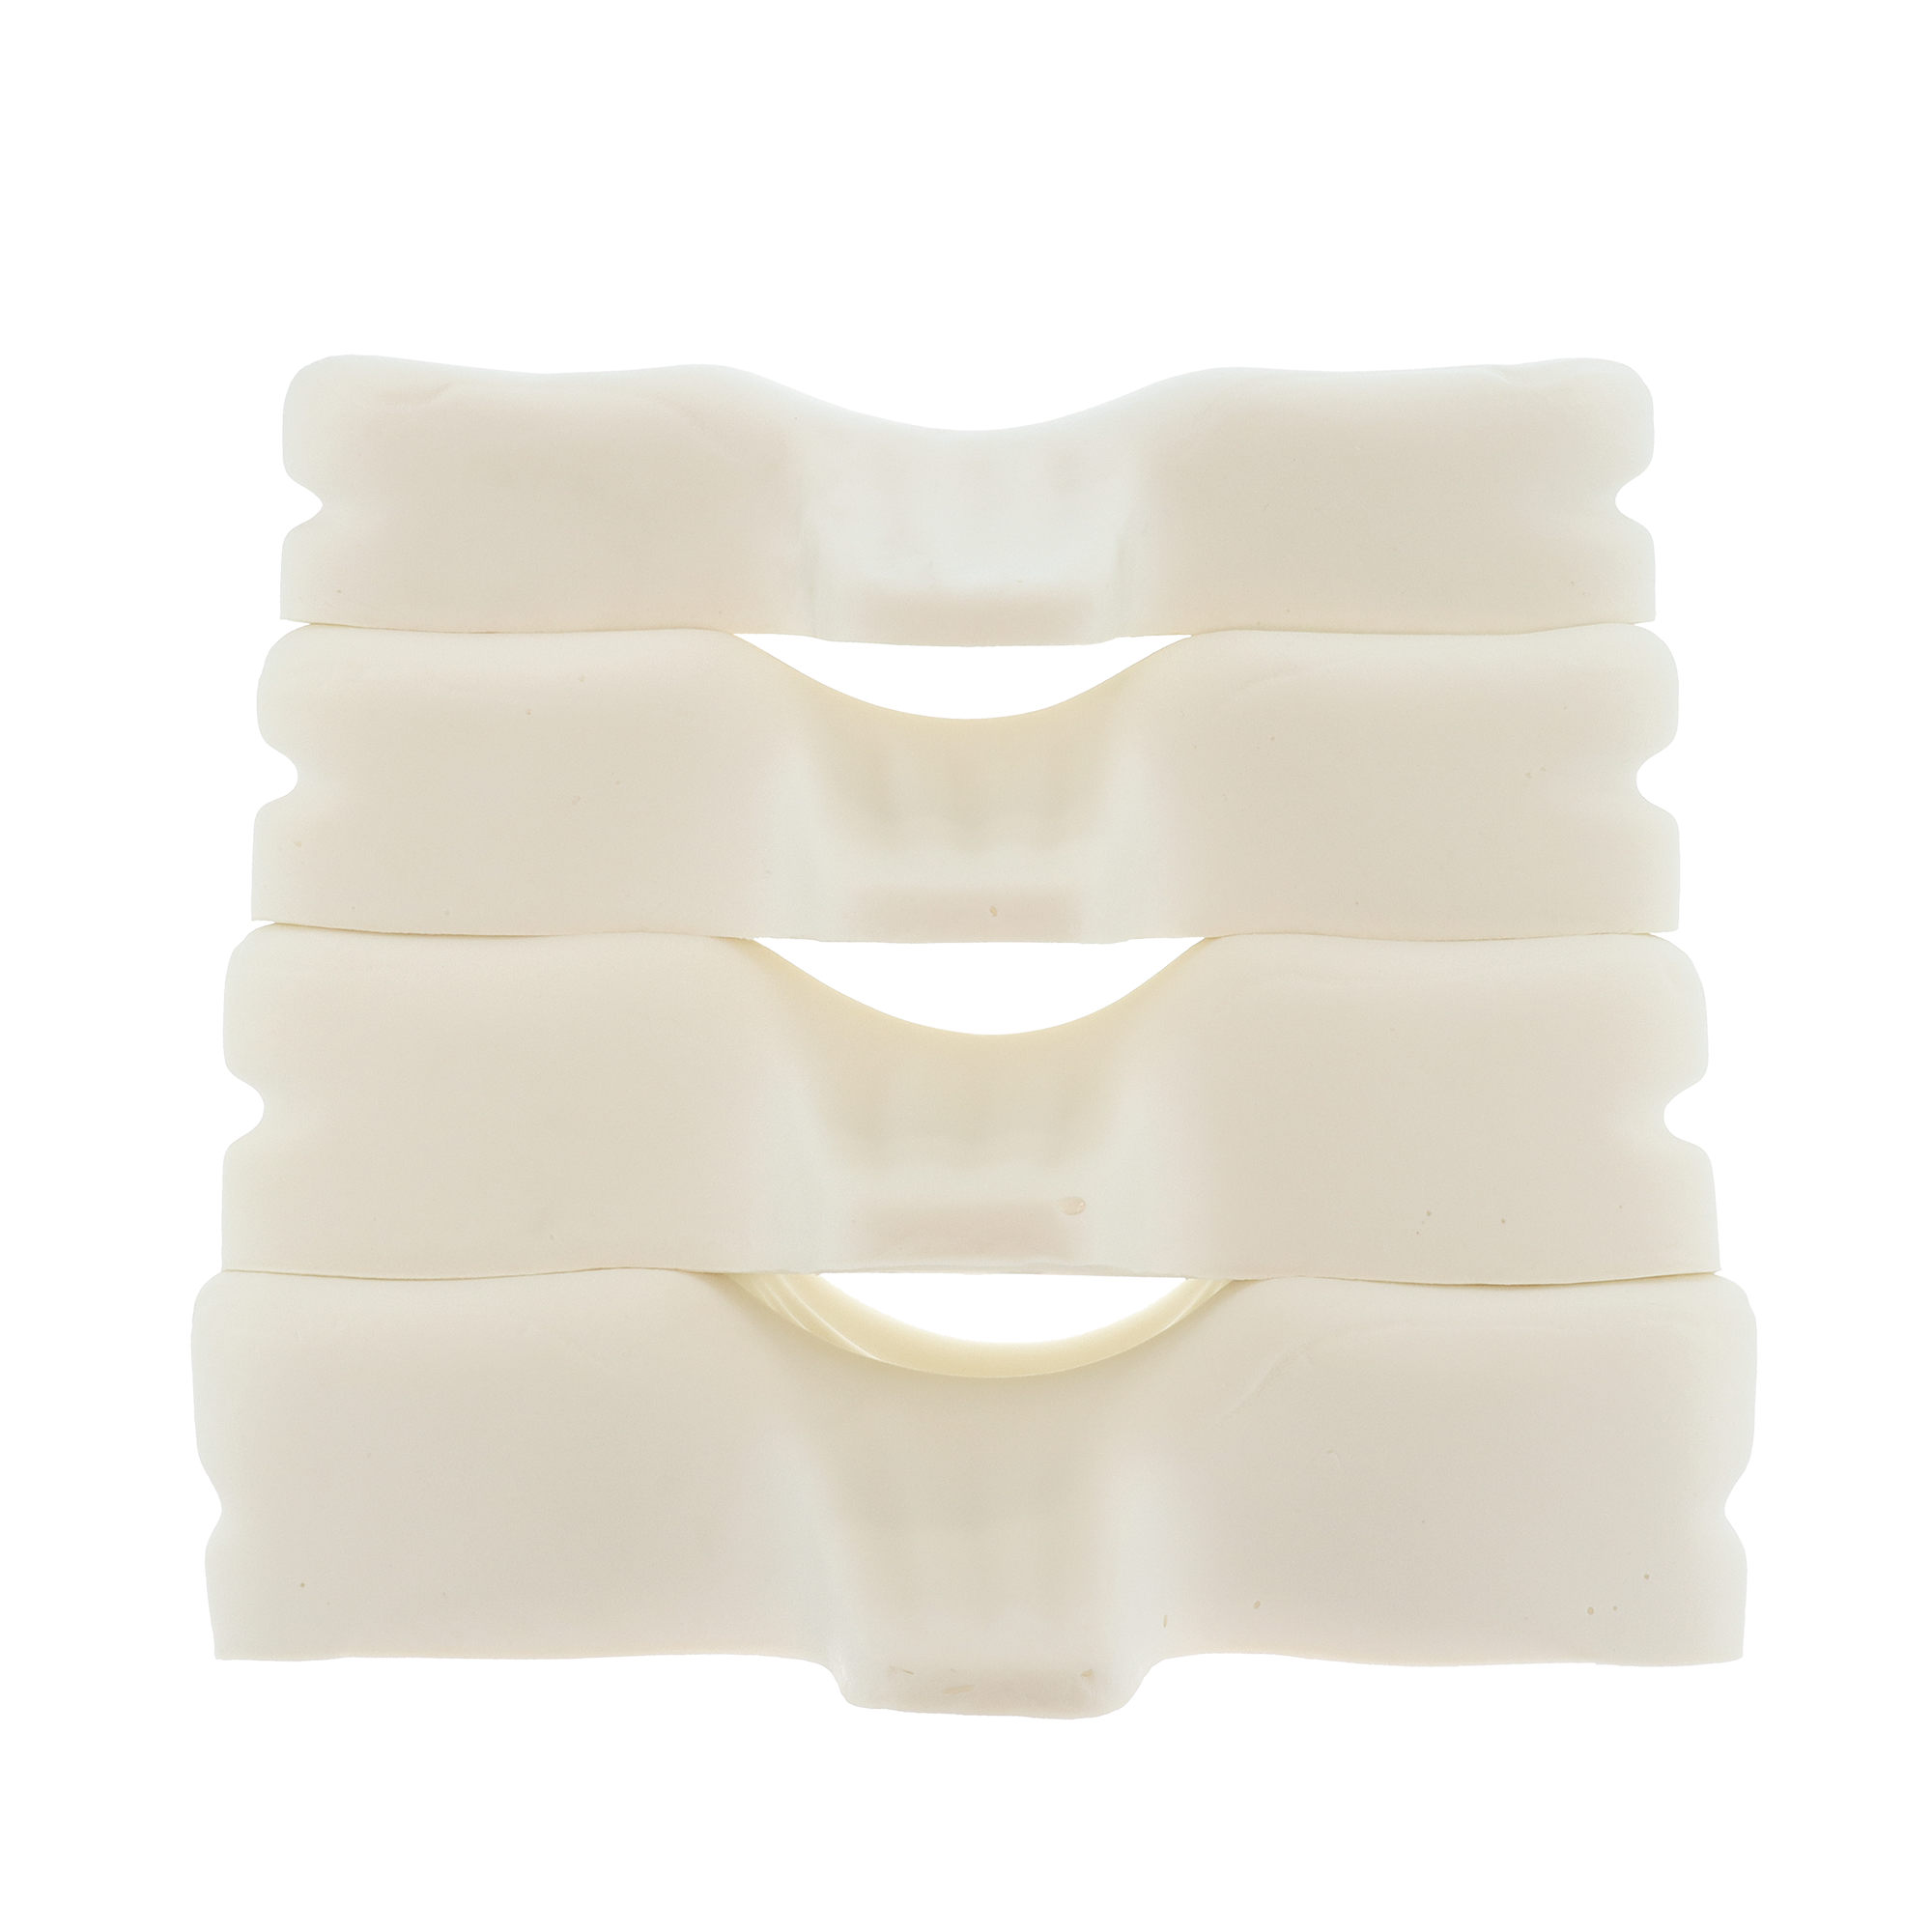 Therapeutica orthopedic pillow by Core Products International stacked on top of each other in various sizes